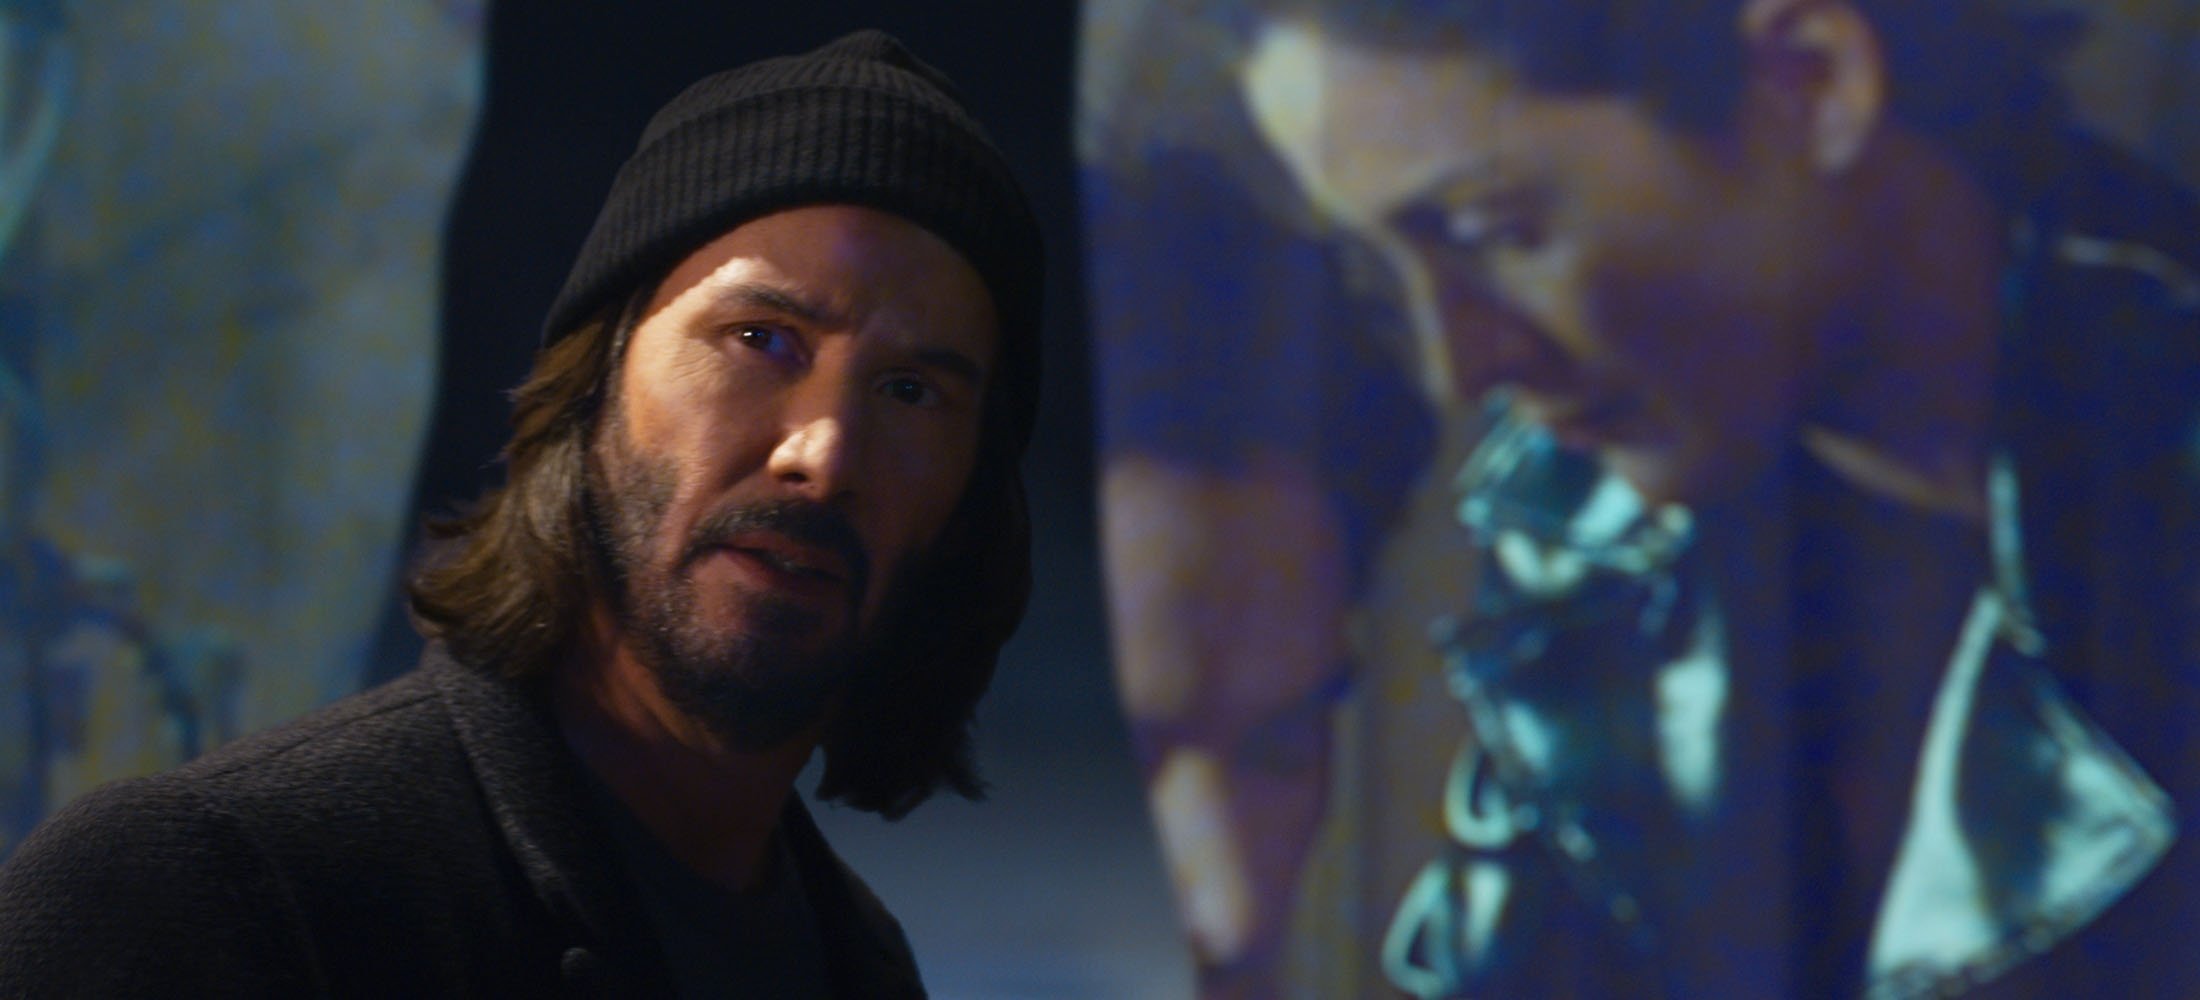 Keanu Reeves, in a scene from the movie 